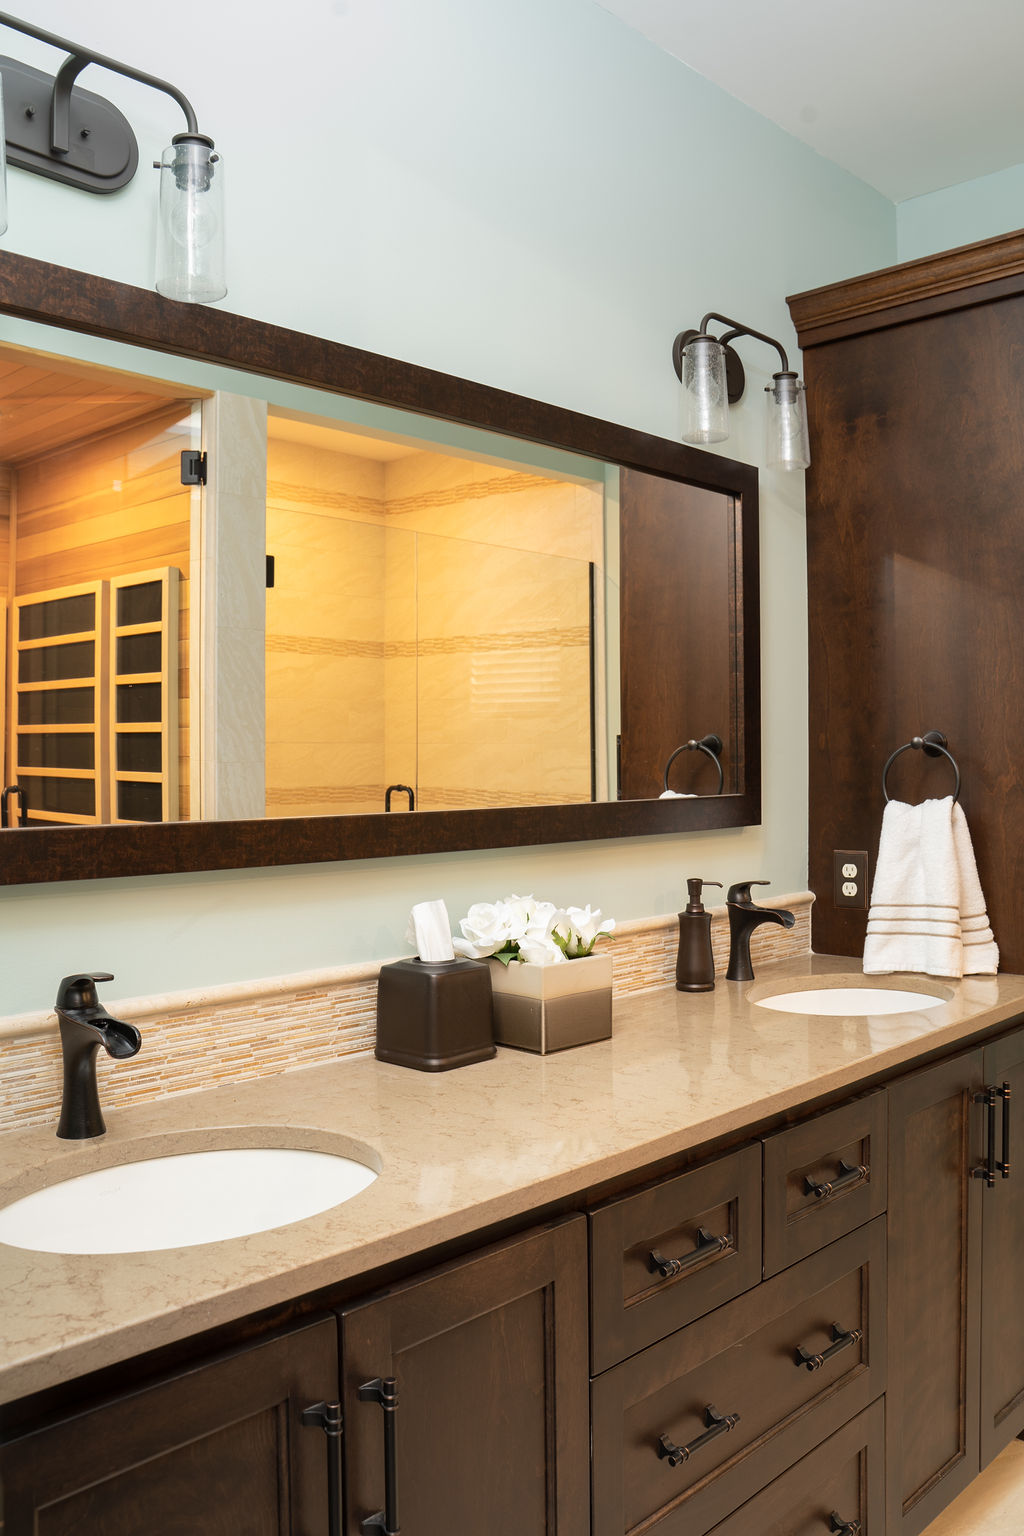 A modern Edina remodel that features a spacious bathroom with two sinks and a large mirror.